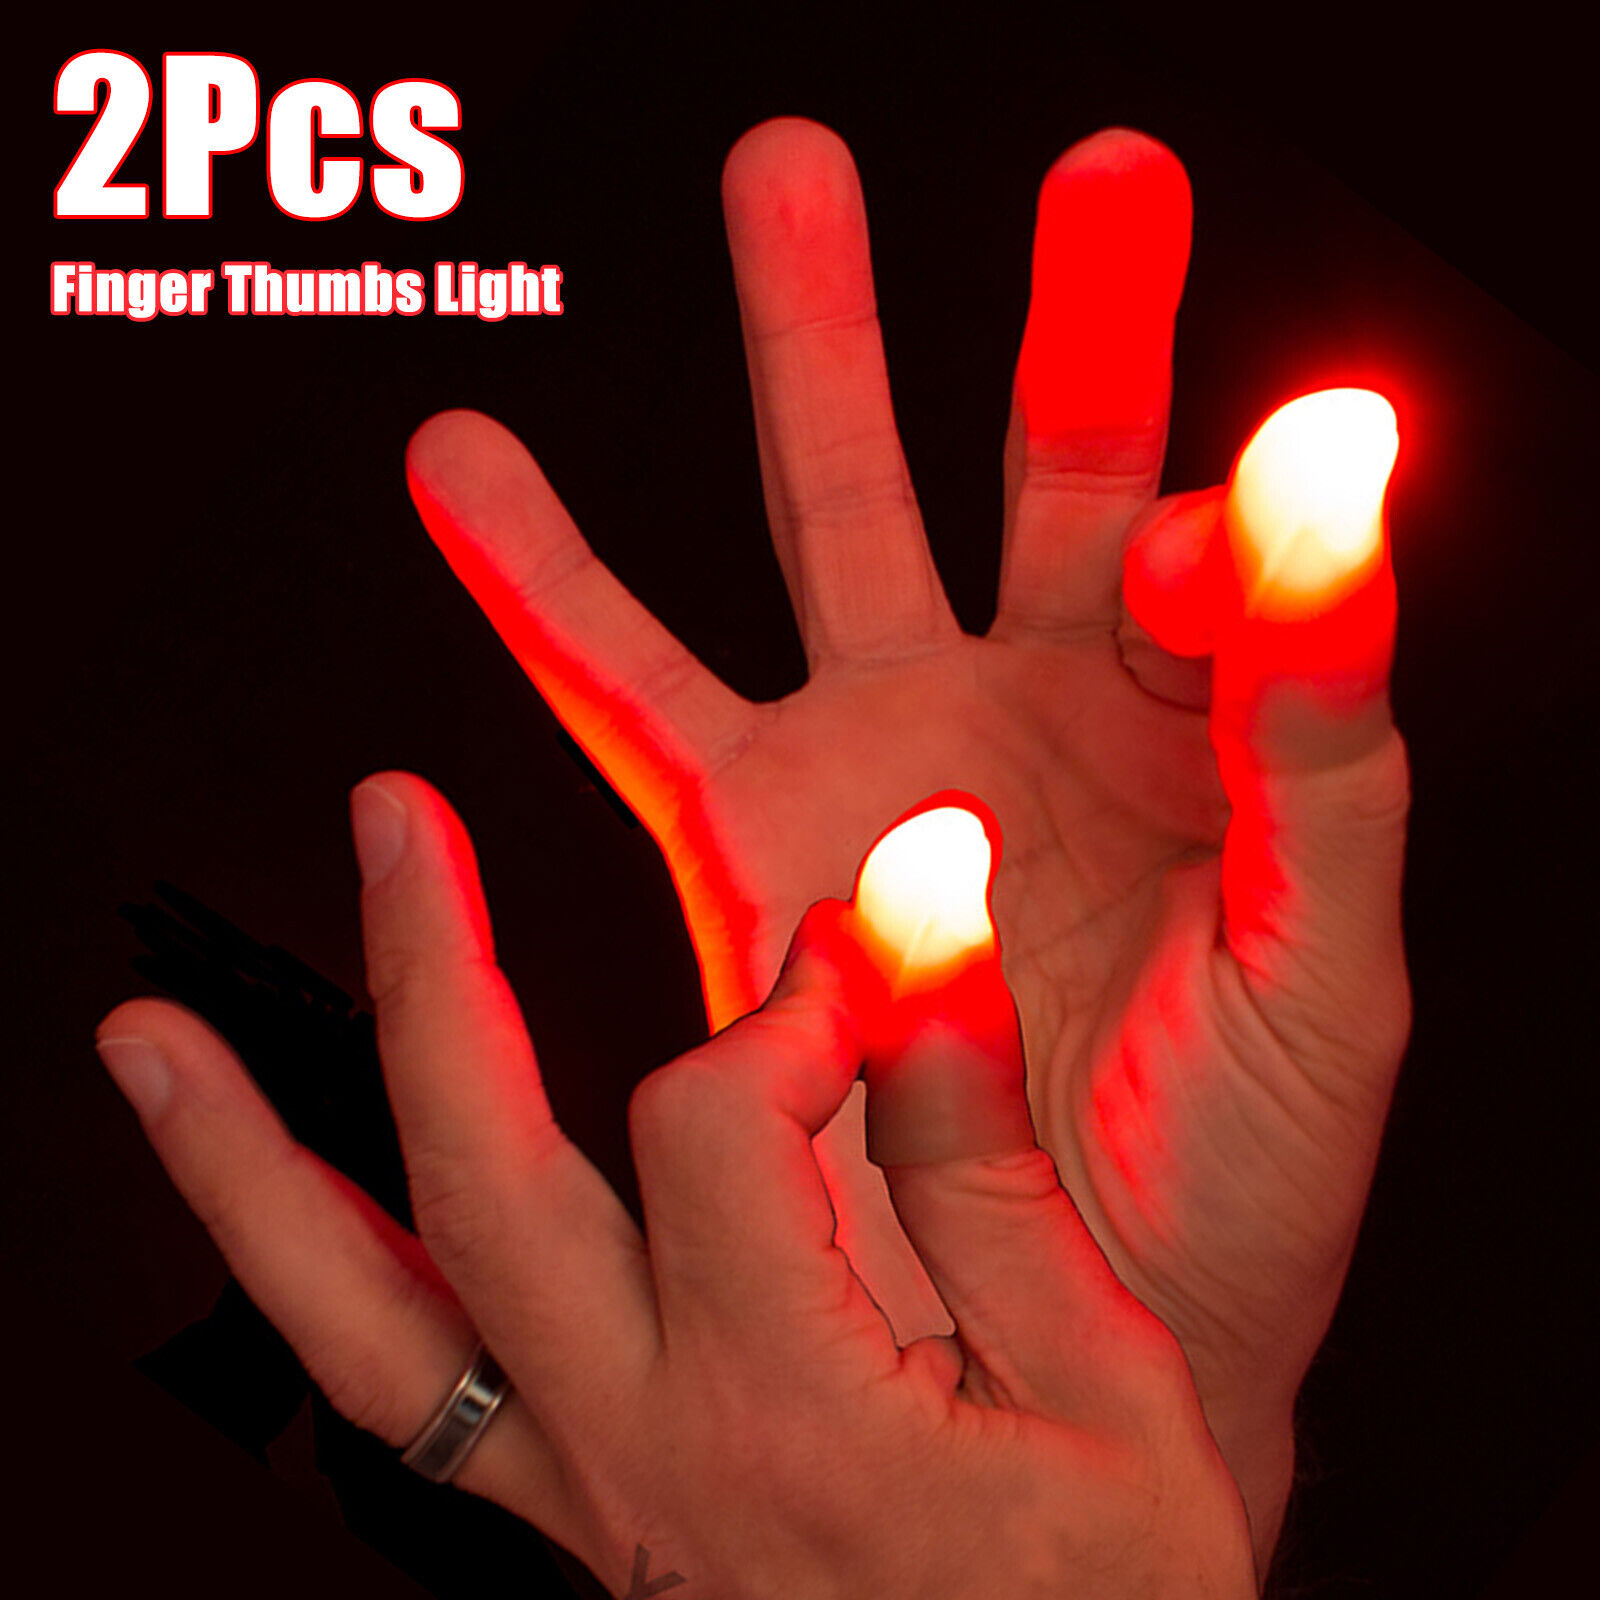 1 Pair Finger Thumbs Light LED Party Bar Lamp Magic Show Prank Trick Red Color